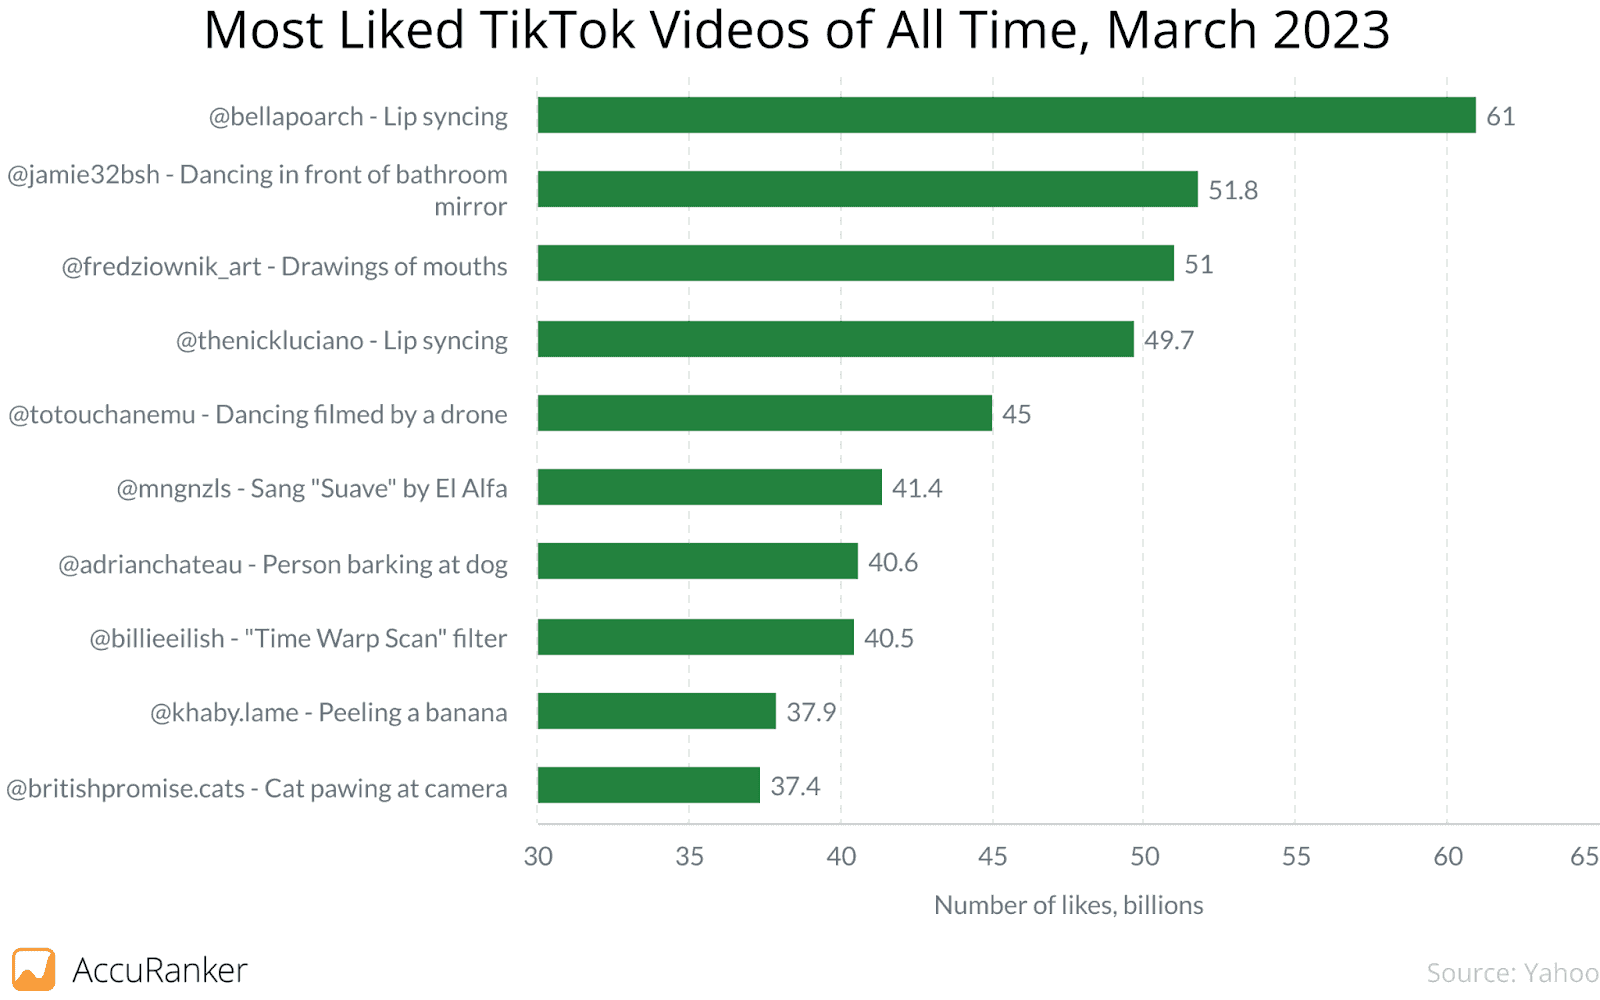 Most liked TikTok videos of all time.png